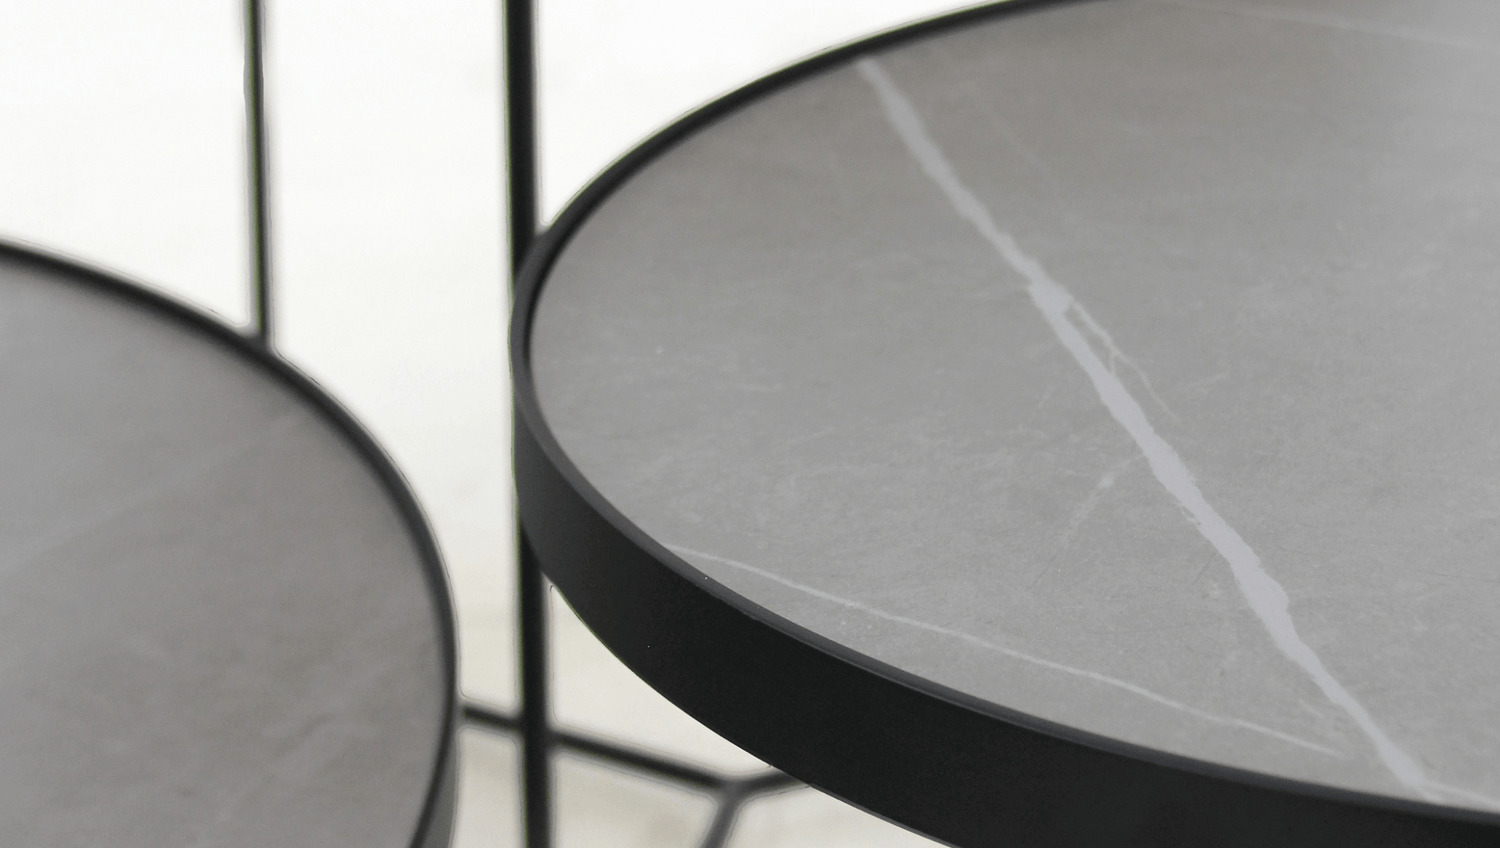 Tables Riley Coffee Table